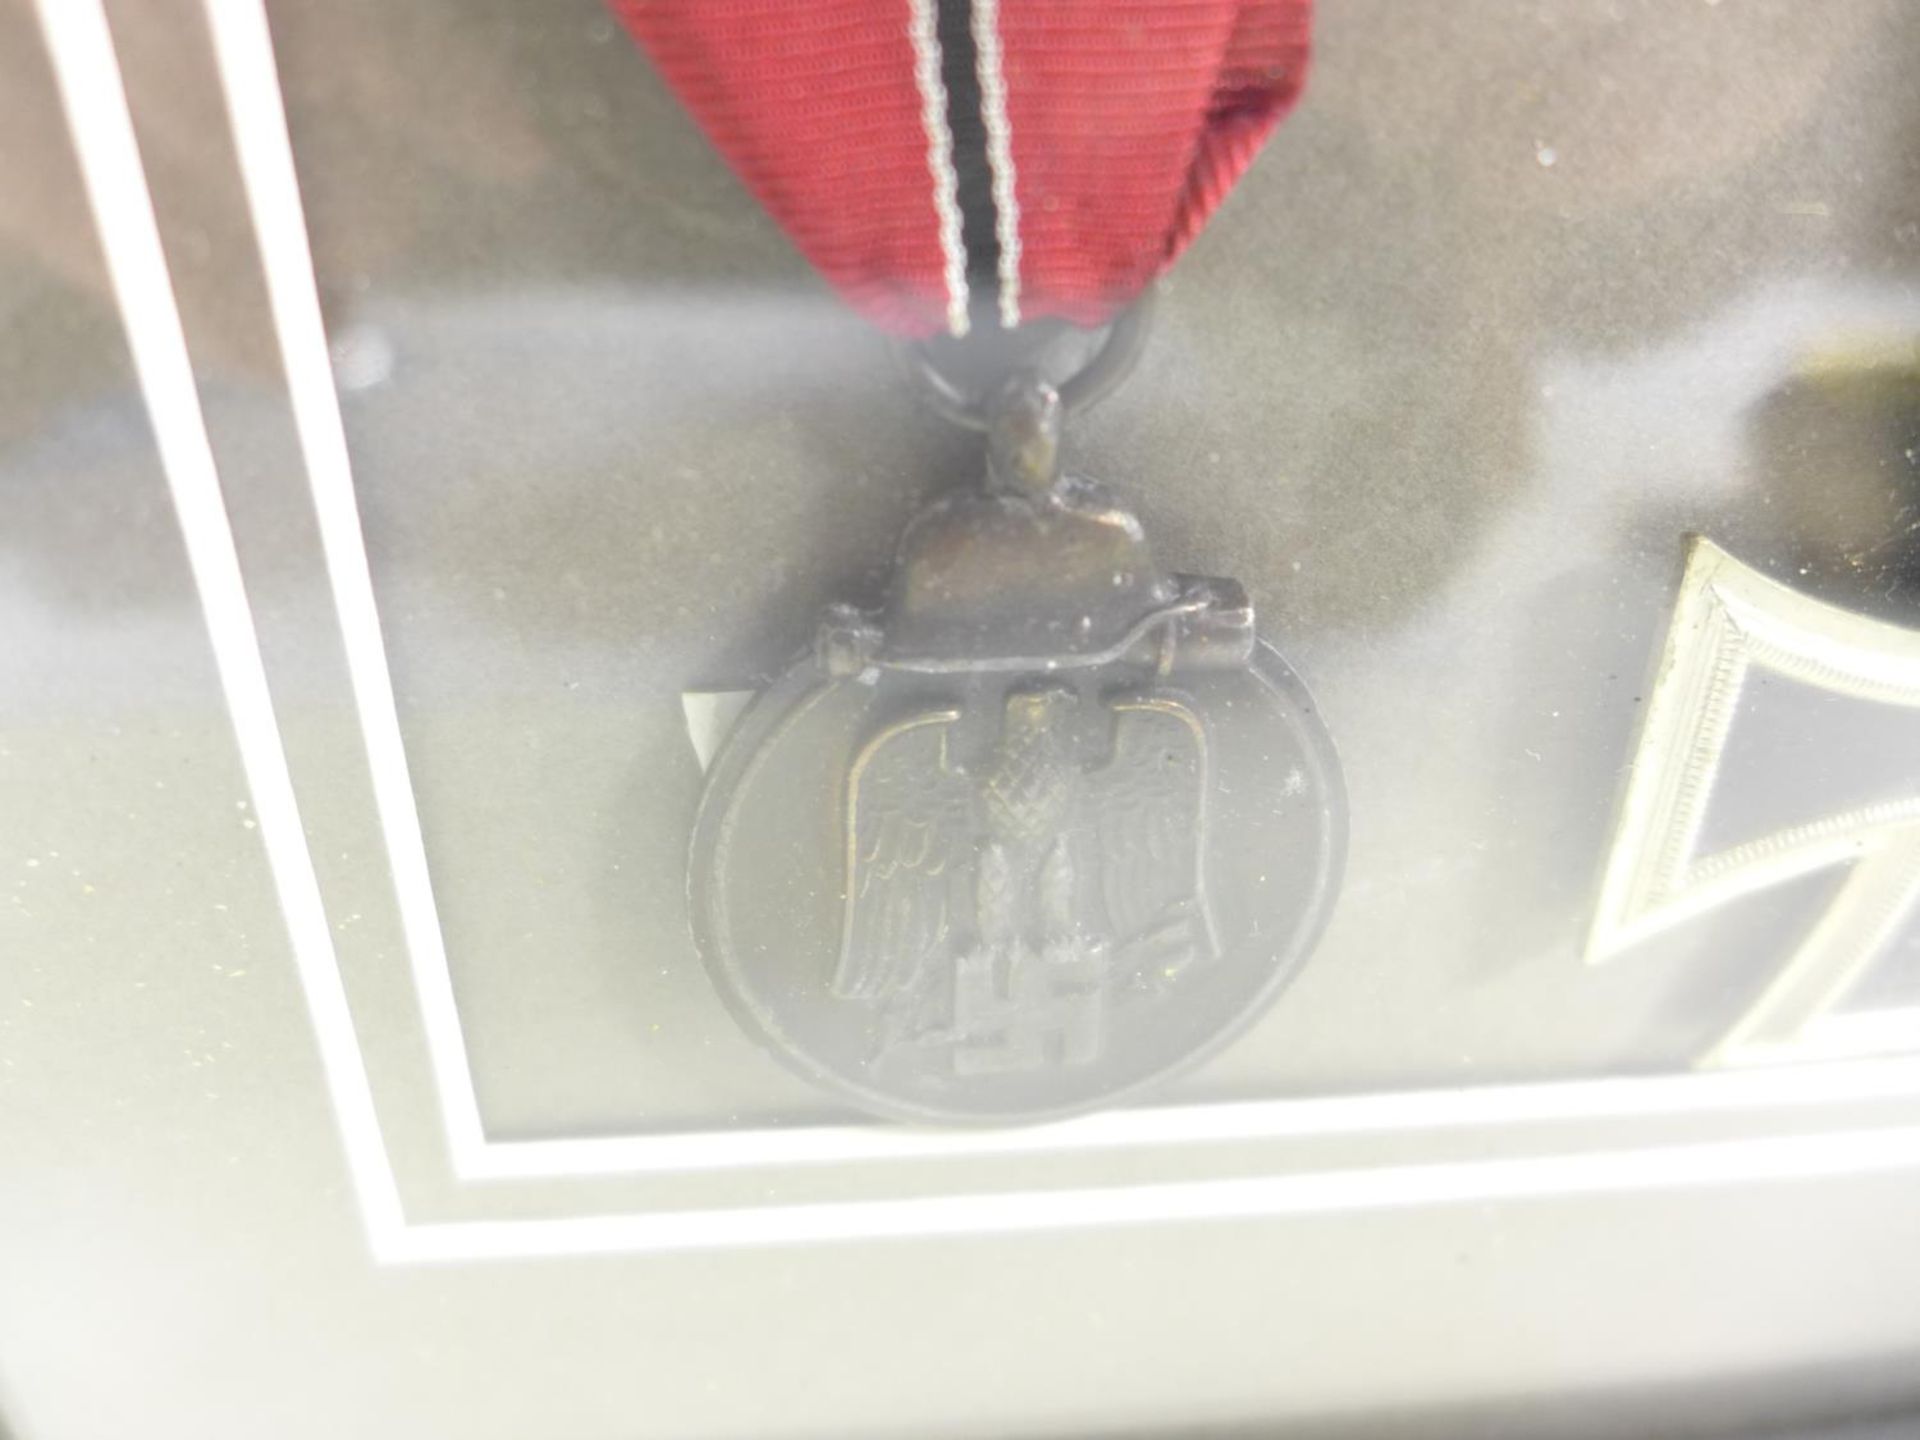 A FRAMED NAZI MEDAL IRON CROSS SECOND CLASS AND A NAZI EASTERN FRONT MEDAL - Image 3 of 5